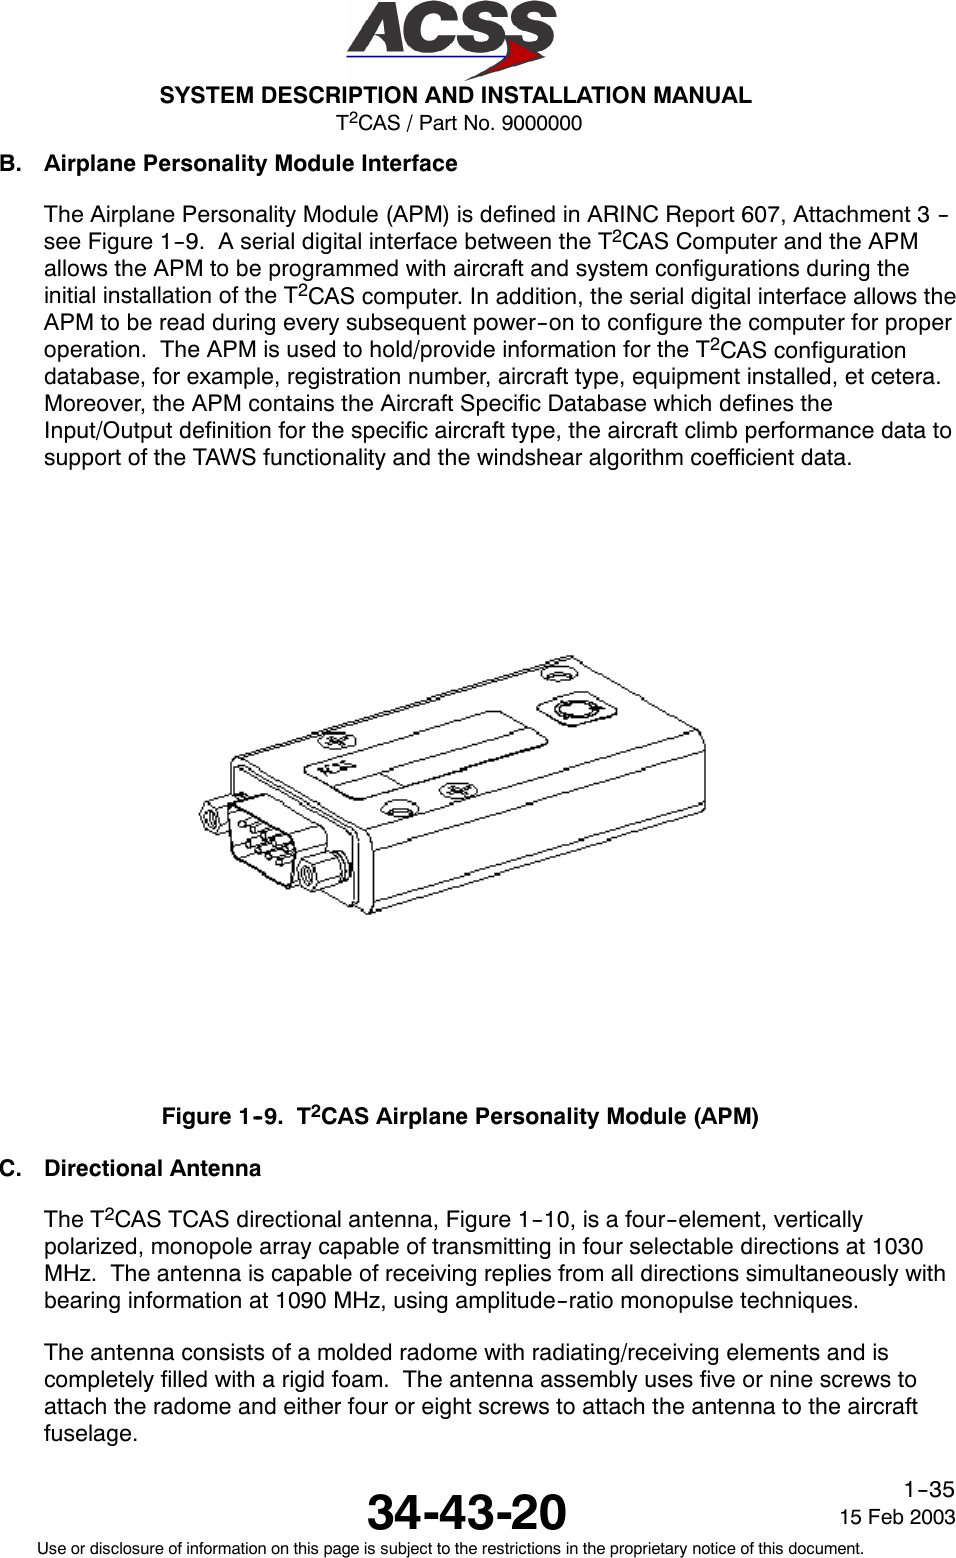 T2CAS / Part No. 9000000SYSTEM DESCRIPTION AND INSTALLATION MANUAL34-43-20 15 Feb 2003Use or disclosure of information on this page is subject to the restrictions in the proprietary notice of this document.1--35B. Airplane Personality Module InterfaceThe Airplane Personality Module (APM) is defined in ARINC Report 607, Attachment 3 --see Figure 1--9. A serial digital interface between the T2CAS Computer and the APMallows the APM to be programmed with aircraft and system configurations during theinitial installation of the T2CAS computer. In addition, the serial digital interface allows theAPM to be read during every subsequent power--on to configure the computer for properoperation. The APM is used to hold/provide information for the T2CAS configurationdatabase, for example, registration number, aircraft type, equipment installed, et cetera.Moreover, the APM contains the Aircraft Specific Database which defines theInput/Output definition for the specific aircraft type, the aircraft climb performance data tosupport of the TAWS functionality and the windshear algorithm coefficient data.Figure 1--9. T2CAS Airplane Personality Module (APM)C. Directional AntennaThe T2CAS TCAS directional antenna, Figure 1--10, is a four--element, verticallypolarized, monopole array capable of transmitting in four selectable directions at 1030MHz. The antenna is capable of receiving replies from all directions simultaneously withbearing information at 1090 MHz, using amplitude--ratio monopulse techniques.The antenna consists of a molded radome with radiating/receiving elements and iscompletely filled with a rigid foam. The antenna assembly uses five or nine screws toattach the radome and either four or eight screws to attach the antenna to the aircraftfuselage.